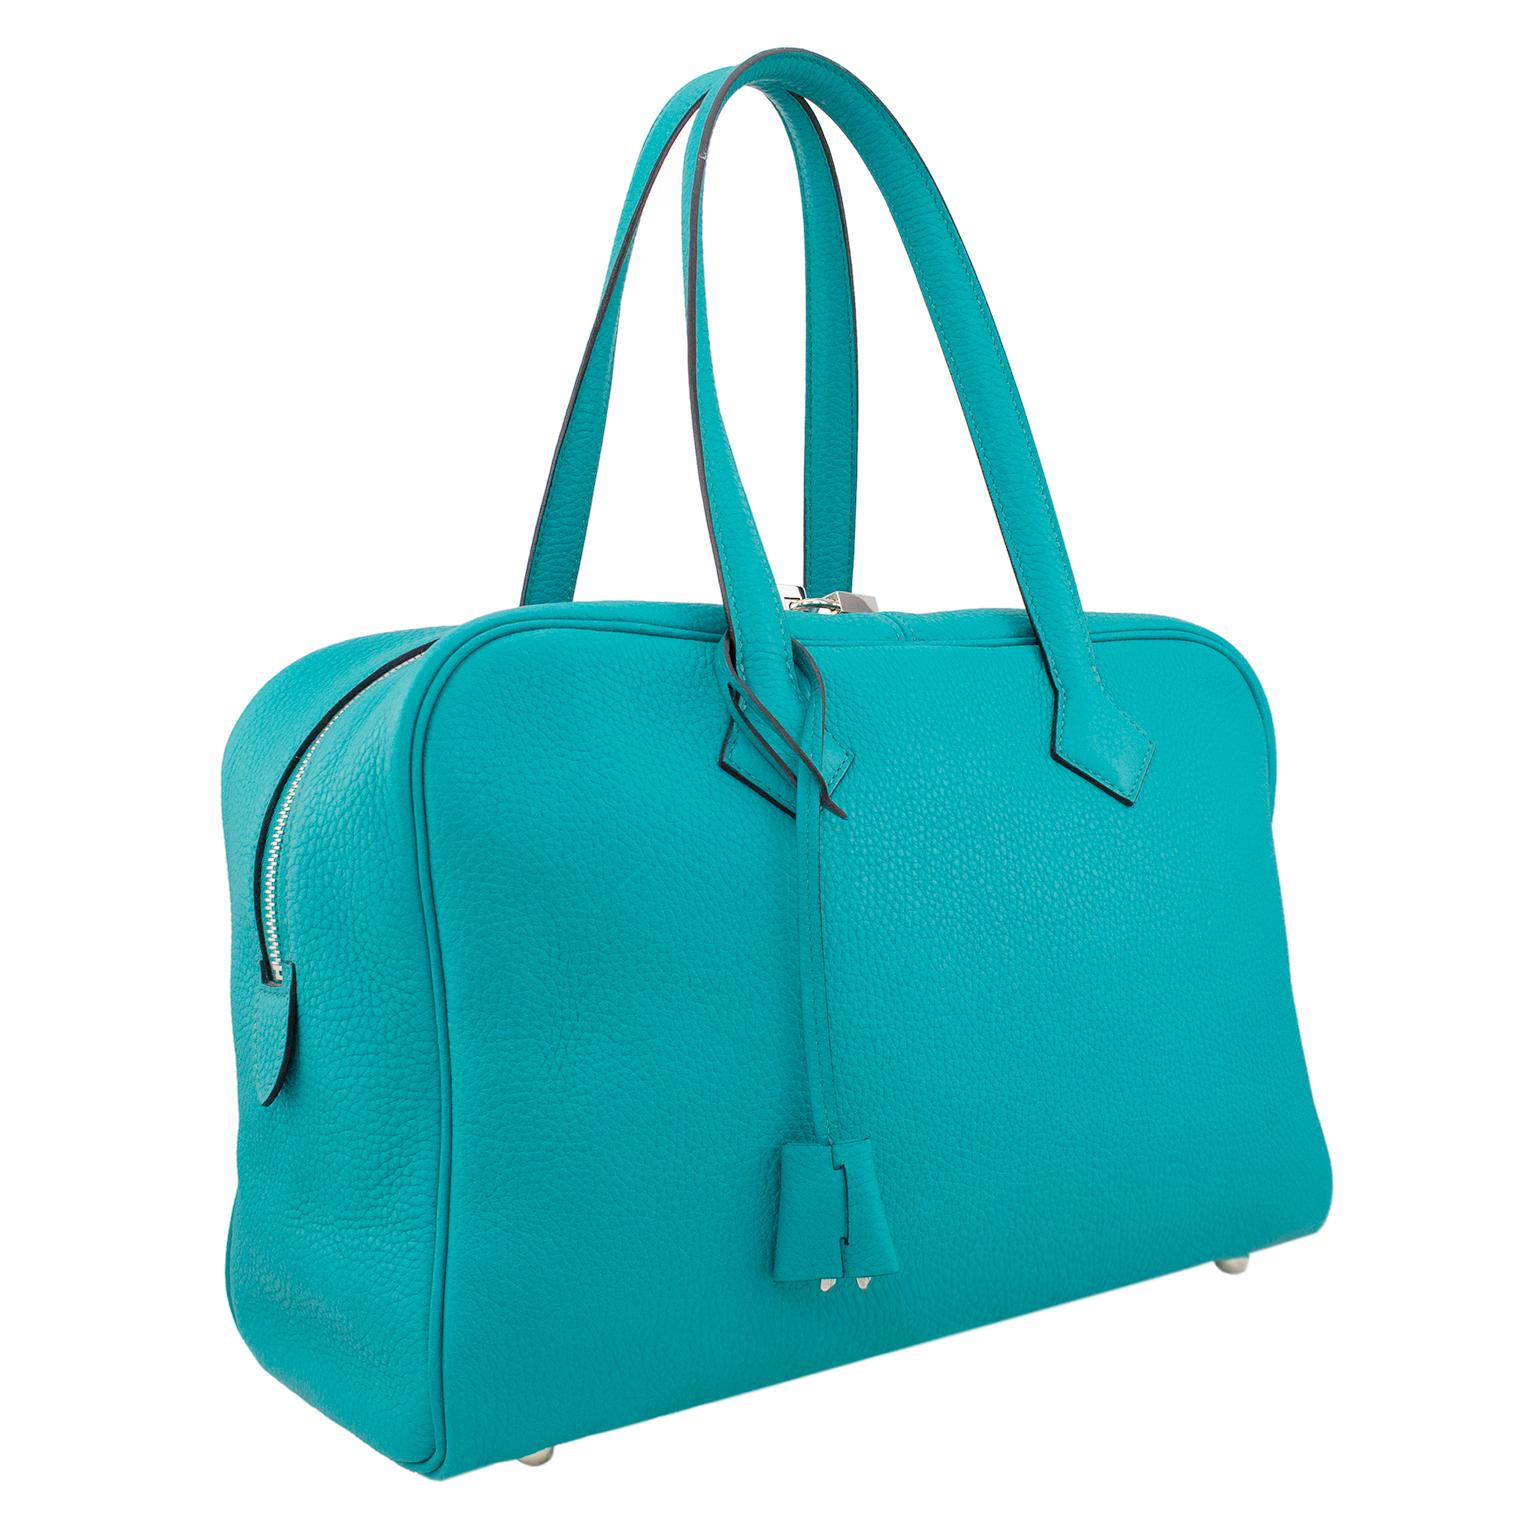 Authentic Hermes Taurillon Clemence Novillo Victoria II 35 in turquoise. It features very tall leather strap handles, a double palladium zipper with lock and opens to a beige herringbone fabric interior with zippered and patch pockets. Taurillion